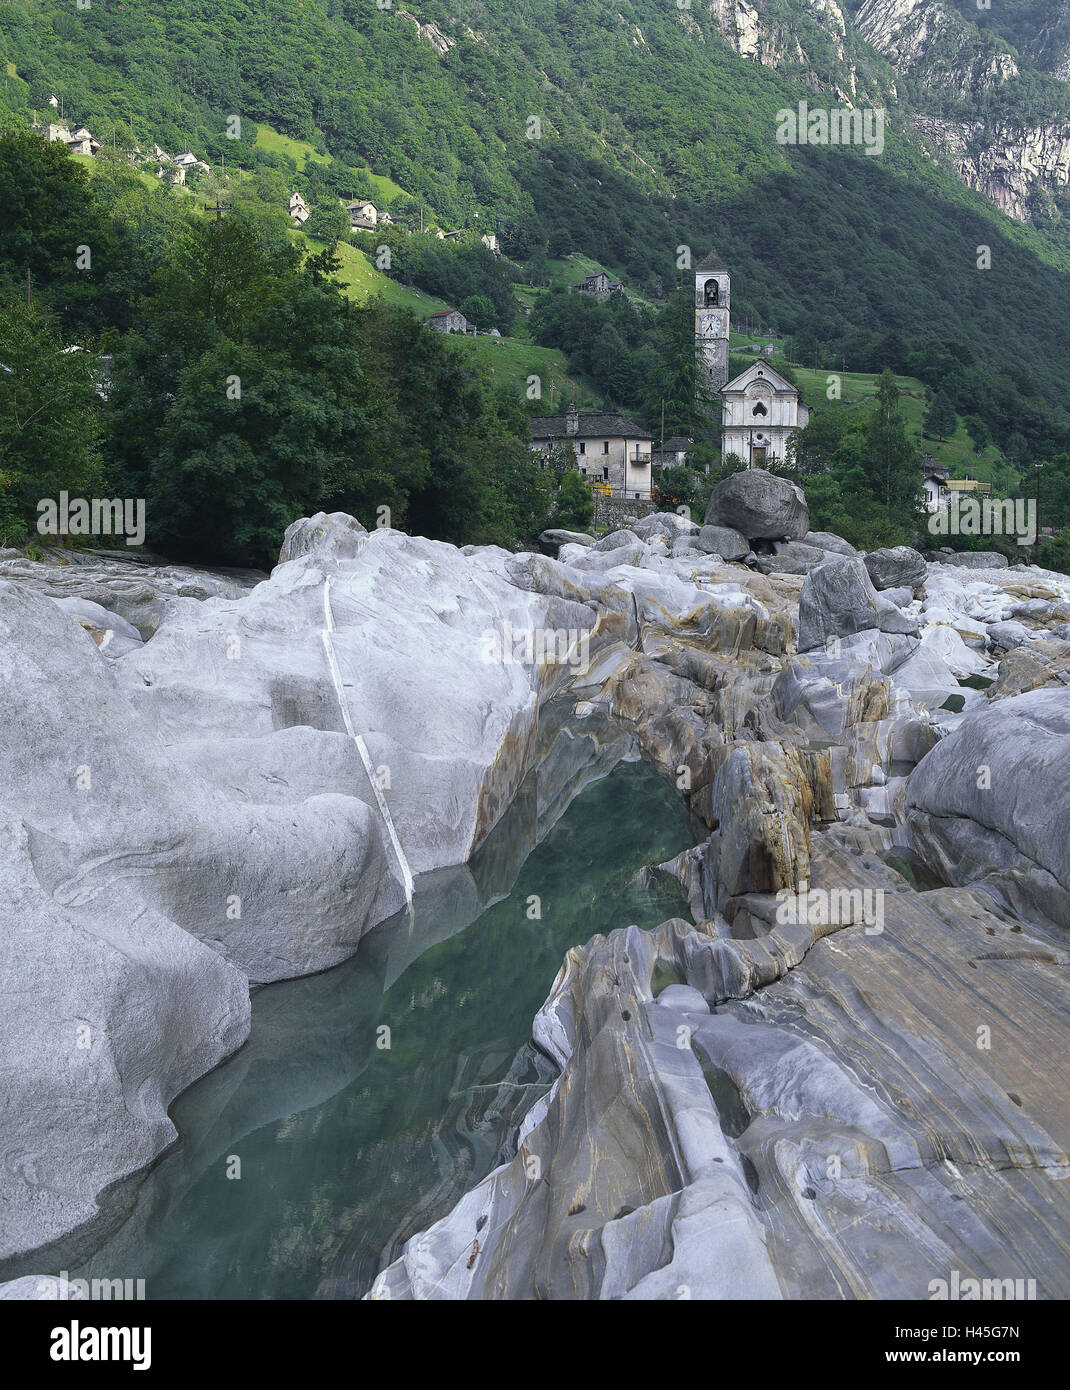 Switzerland, canton Ticino, Valle Verzasca, Lavertezzo, mountain river, Verzascatal, valley, village, place, church, steeple, mountain river, waters, rock, granite, rock, flatly, incredibly, place of interest, formation, bile formation, scenery, mountain wood, wood, silence, rest, mountains, alps, alp room, season, summer, sunshine, shade, nobody, Stock Photo